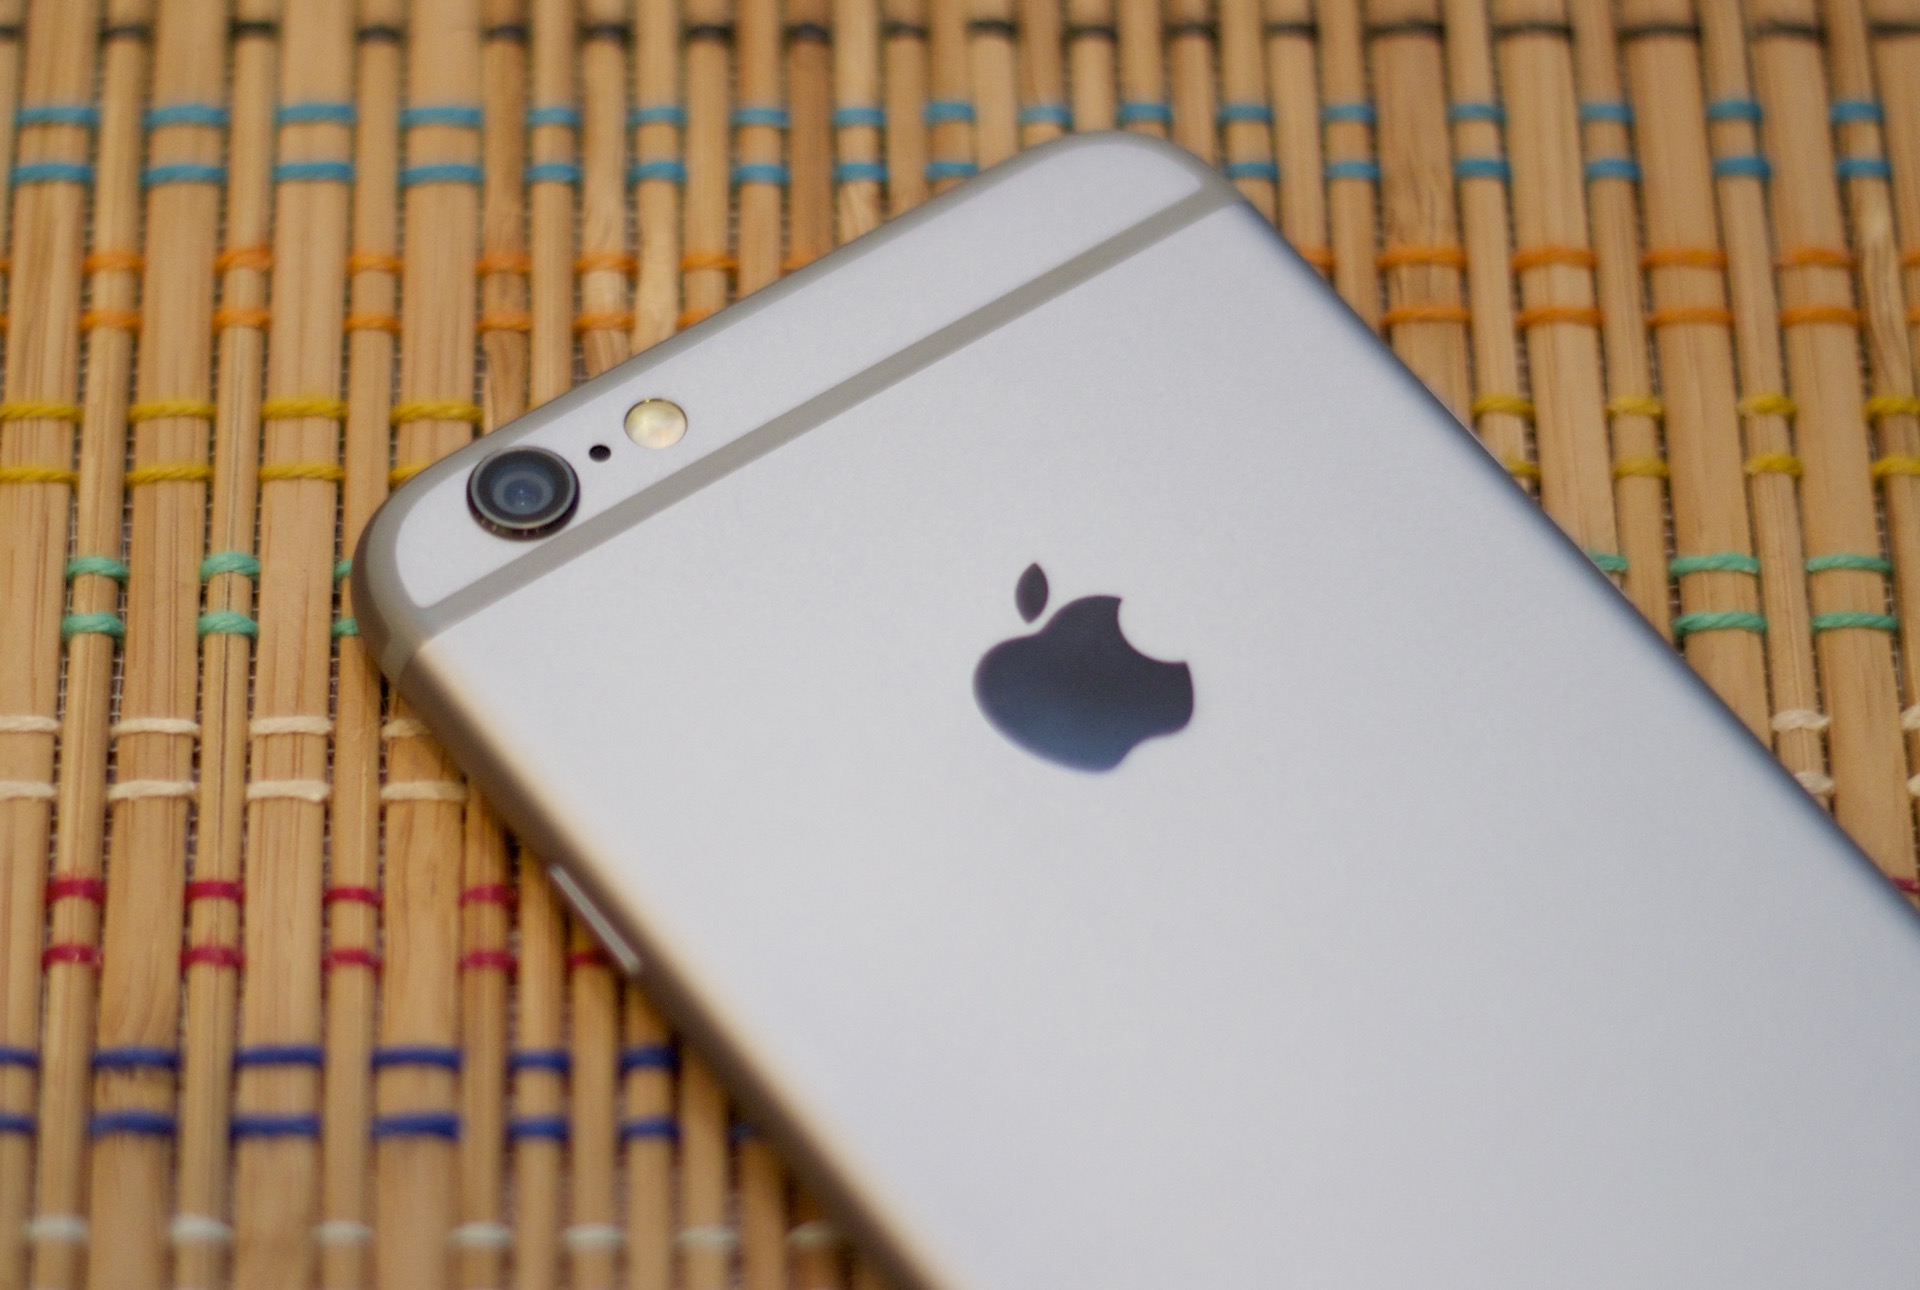 The Differences Between the iPhone 6 and 6 Plus